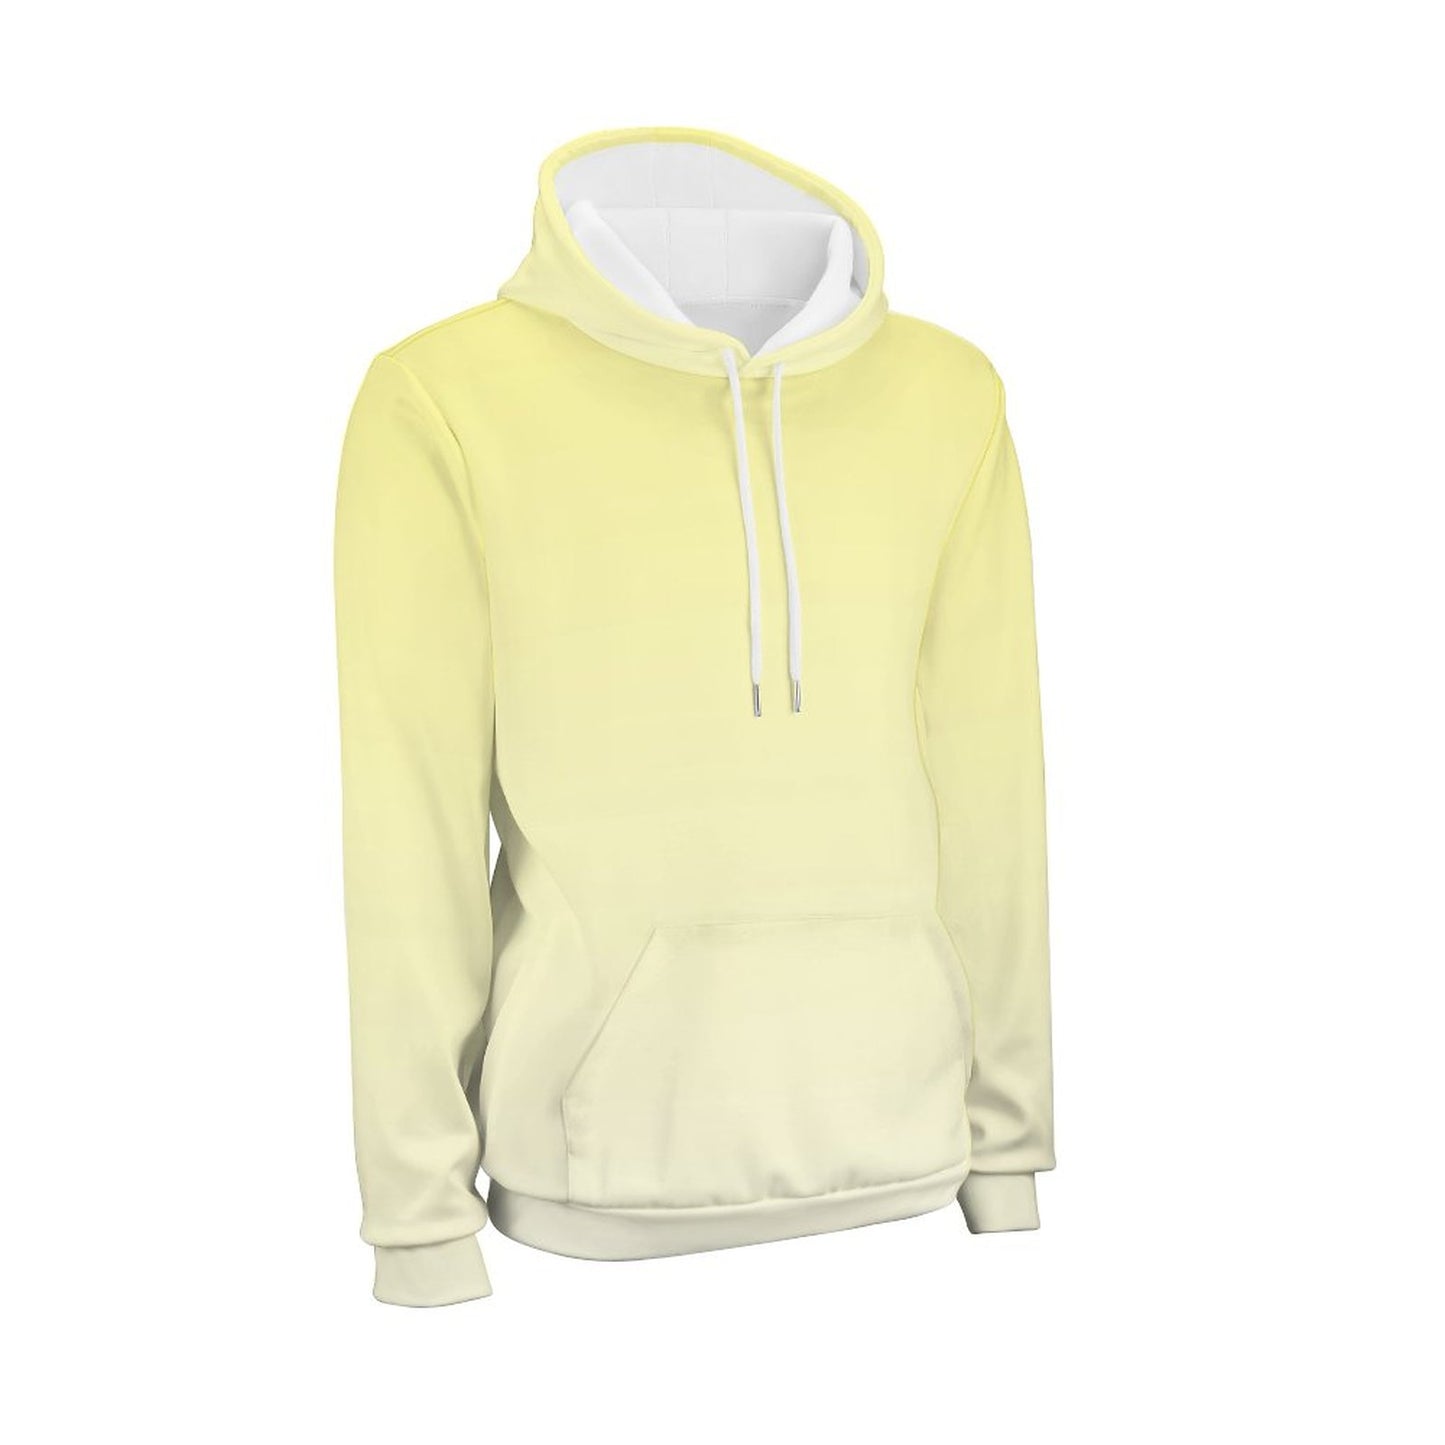 Personalize This Hoodie & Joggers Set-S to 5XL-Yellow